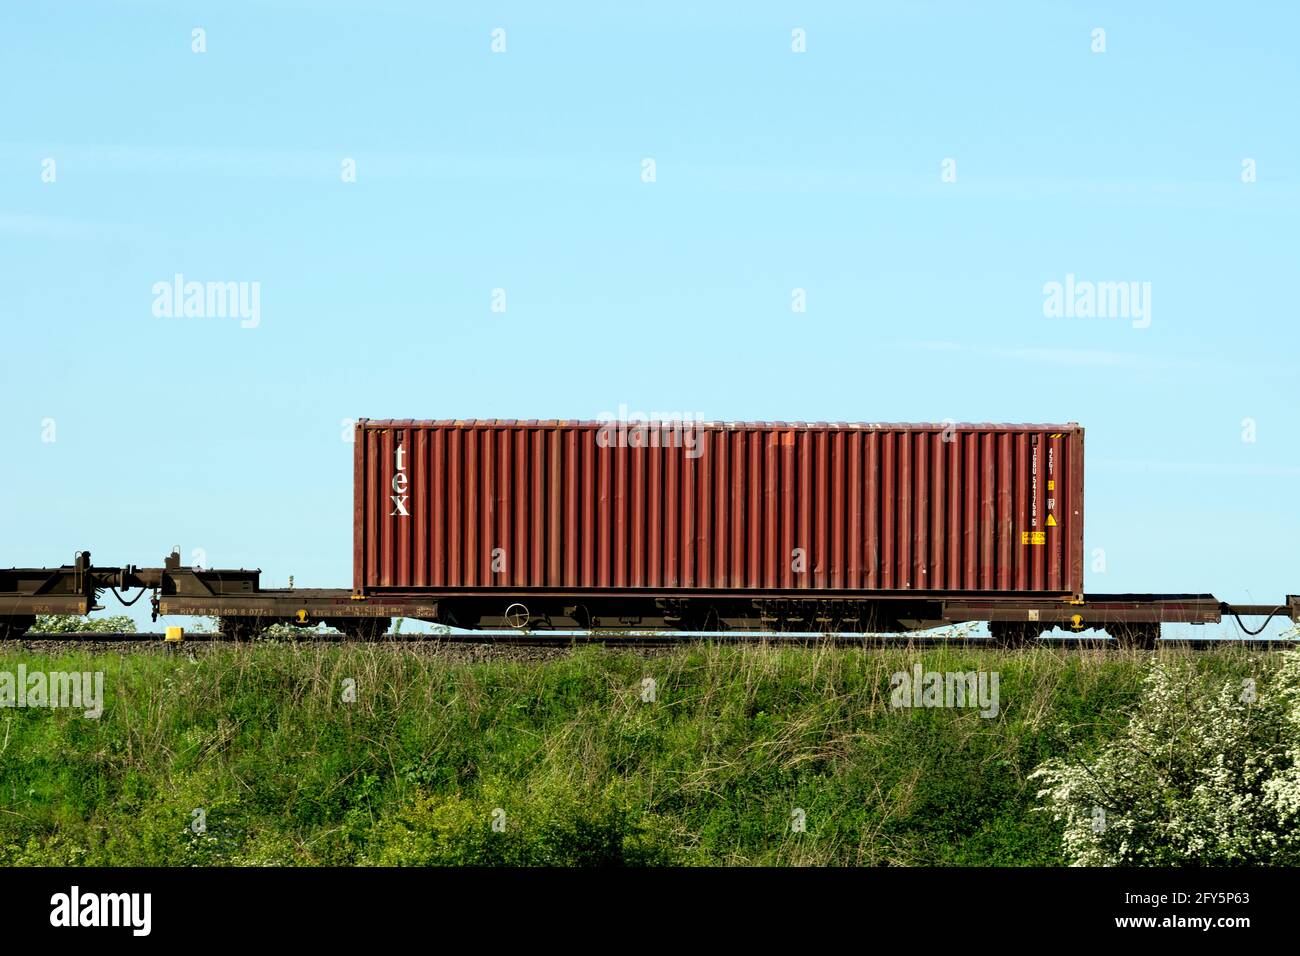 Tex shipping container on a freightliner train, Warwickshire, UK Stock Photo